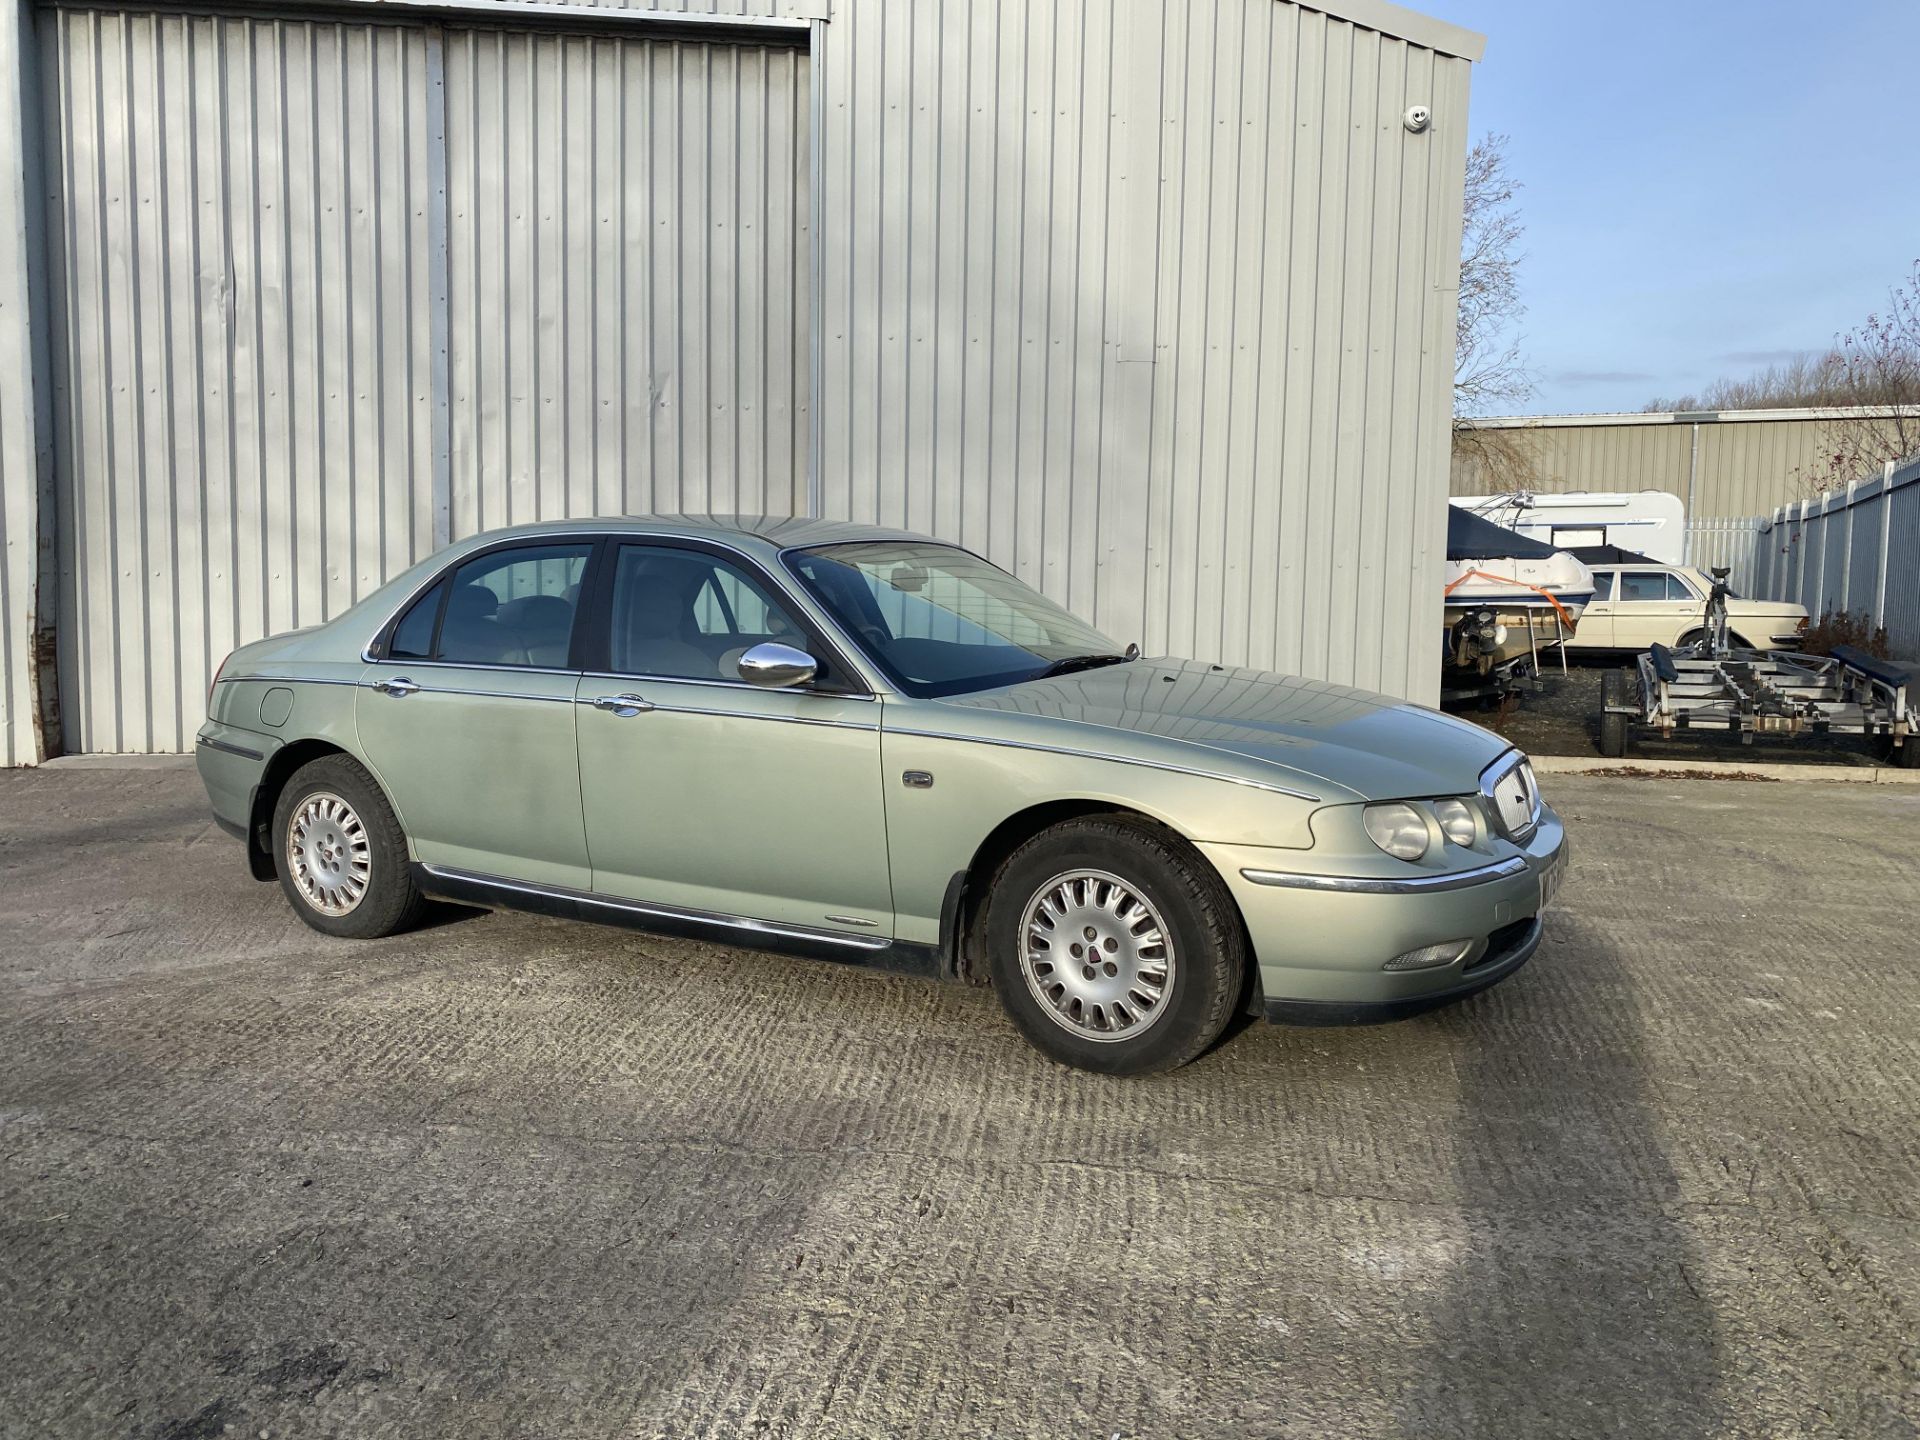 Rover 75 Connoisseur - Image 2 of 26